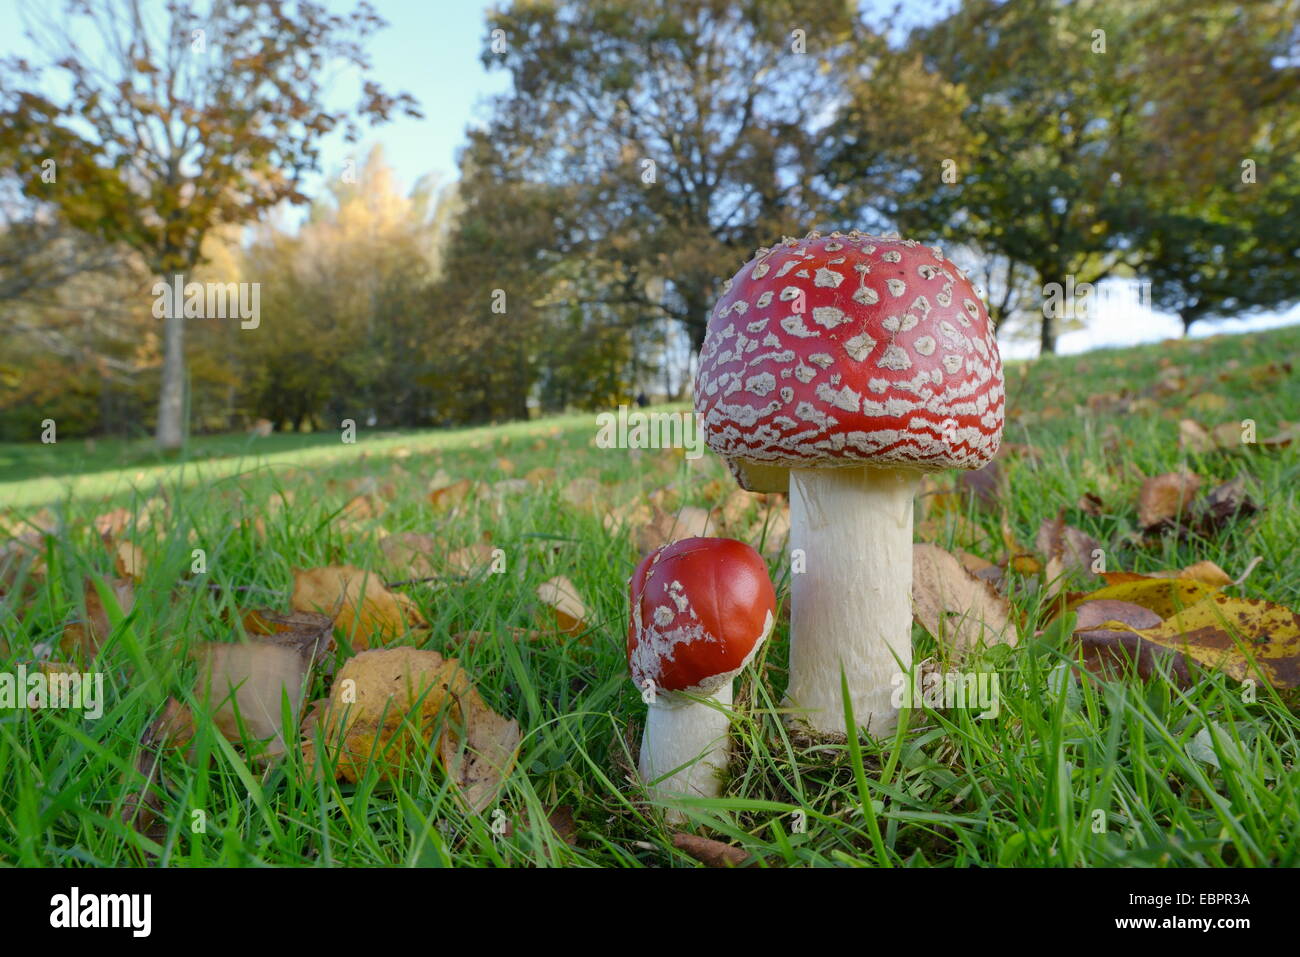 Fly agaric toadstool (Amanita muscaria) growing in grassland, Coate Water Country Park, Swindon, Wiltshire, England, UK Stock Photo